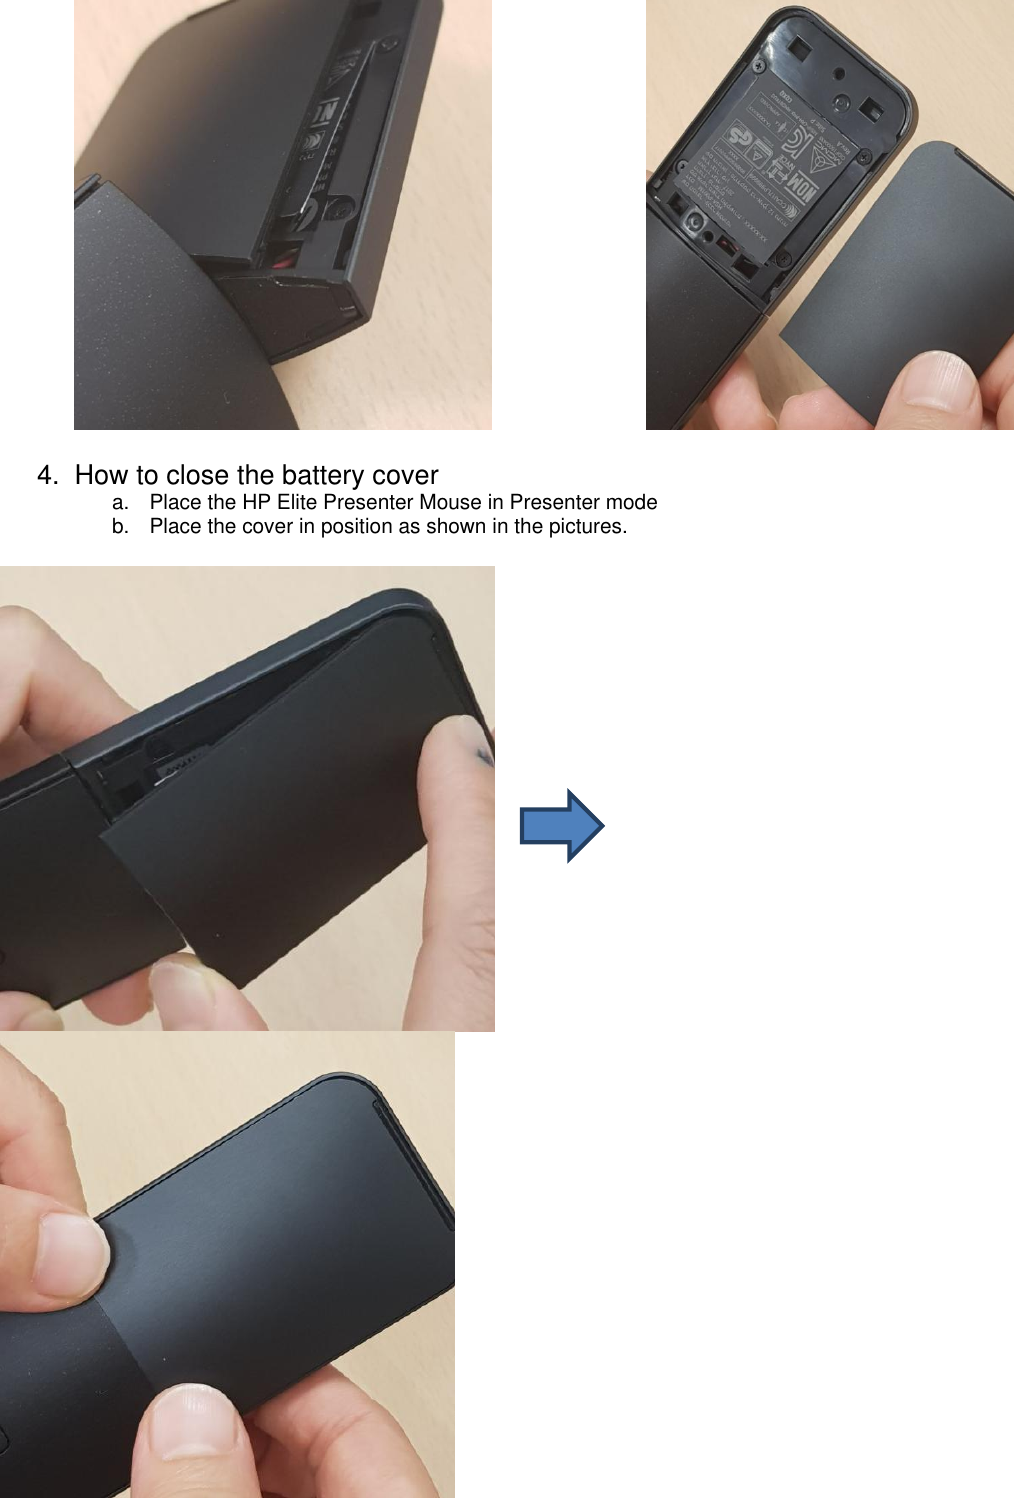                        4.  How to close the battery cover a.  Place the HP Elite Presenter Mouse in Presenter mode b.  Place the cover in position as shown in the pictures.                         